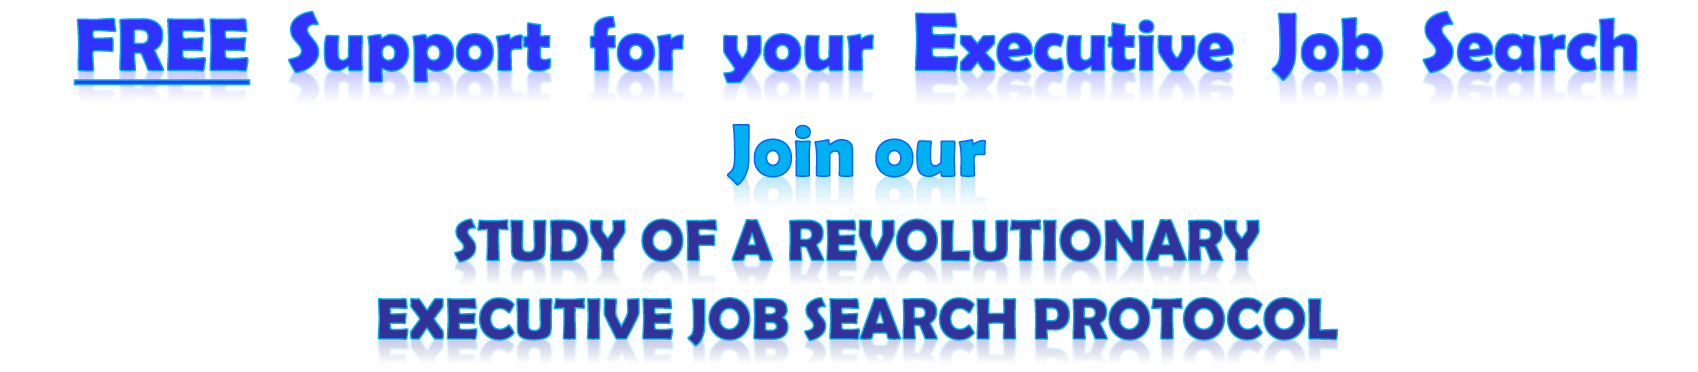 FREE EXECUTIVE JOB SEARCH SUPPORT